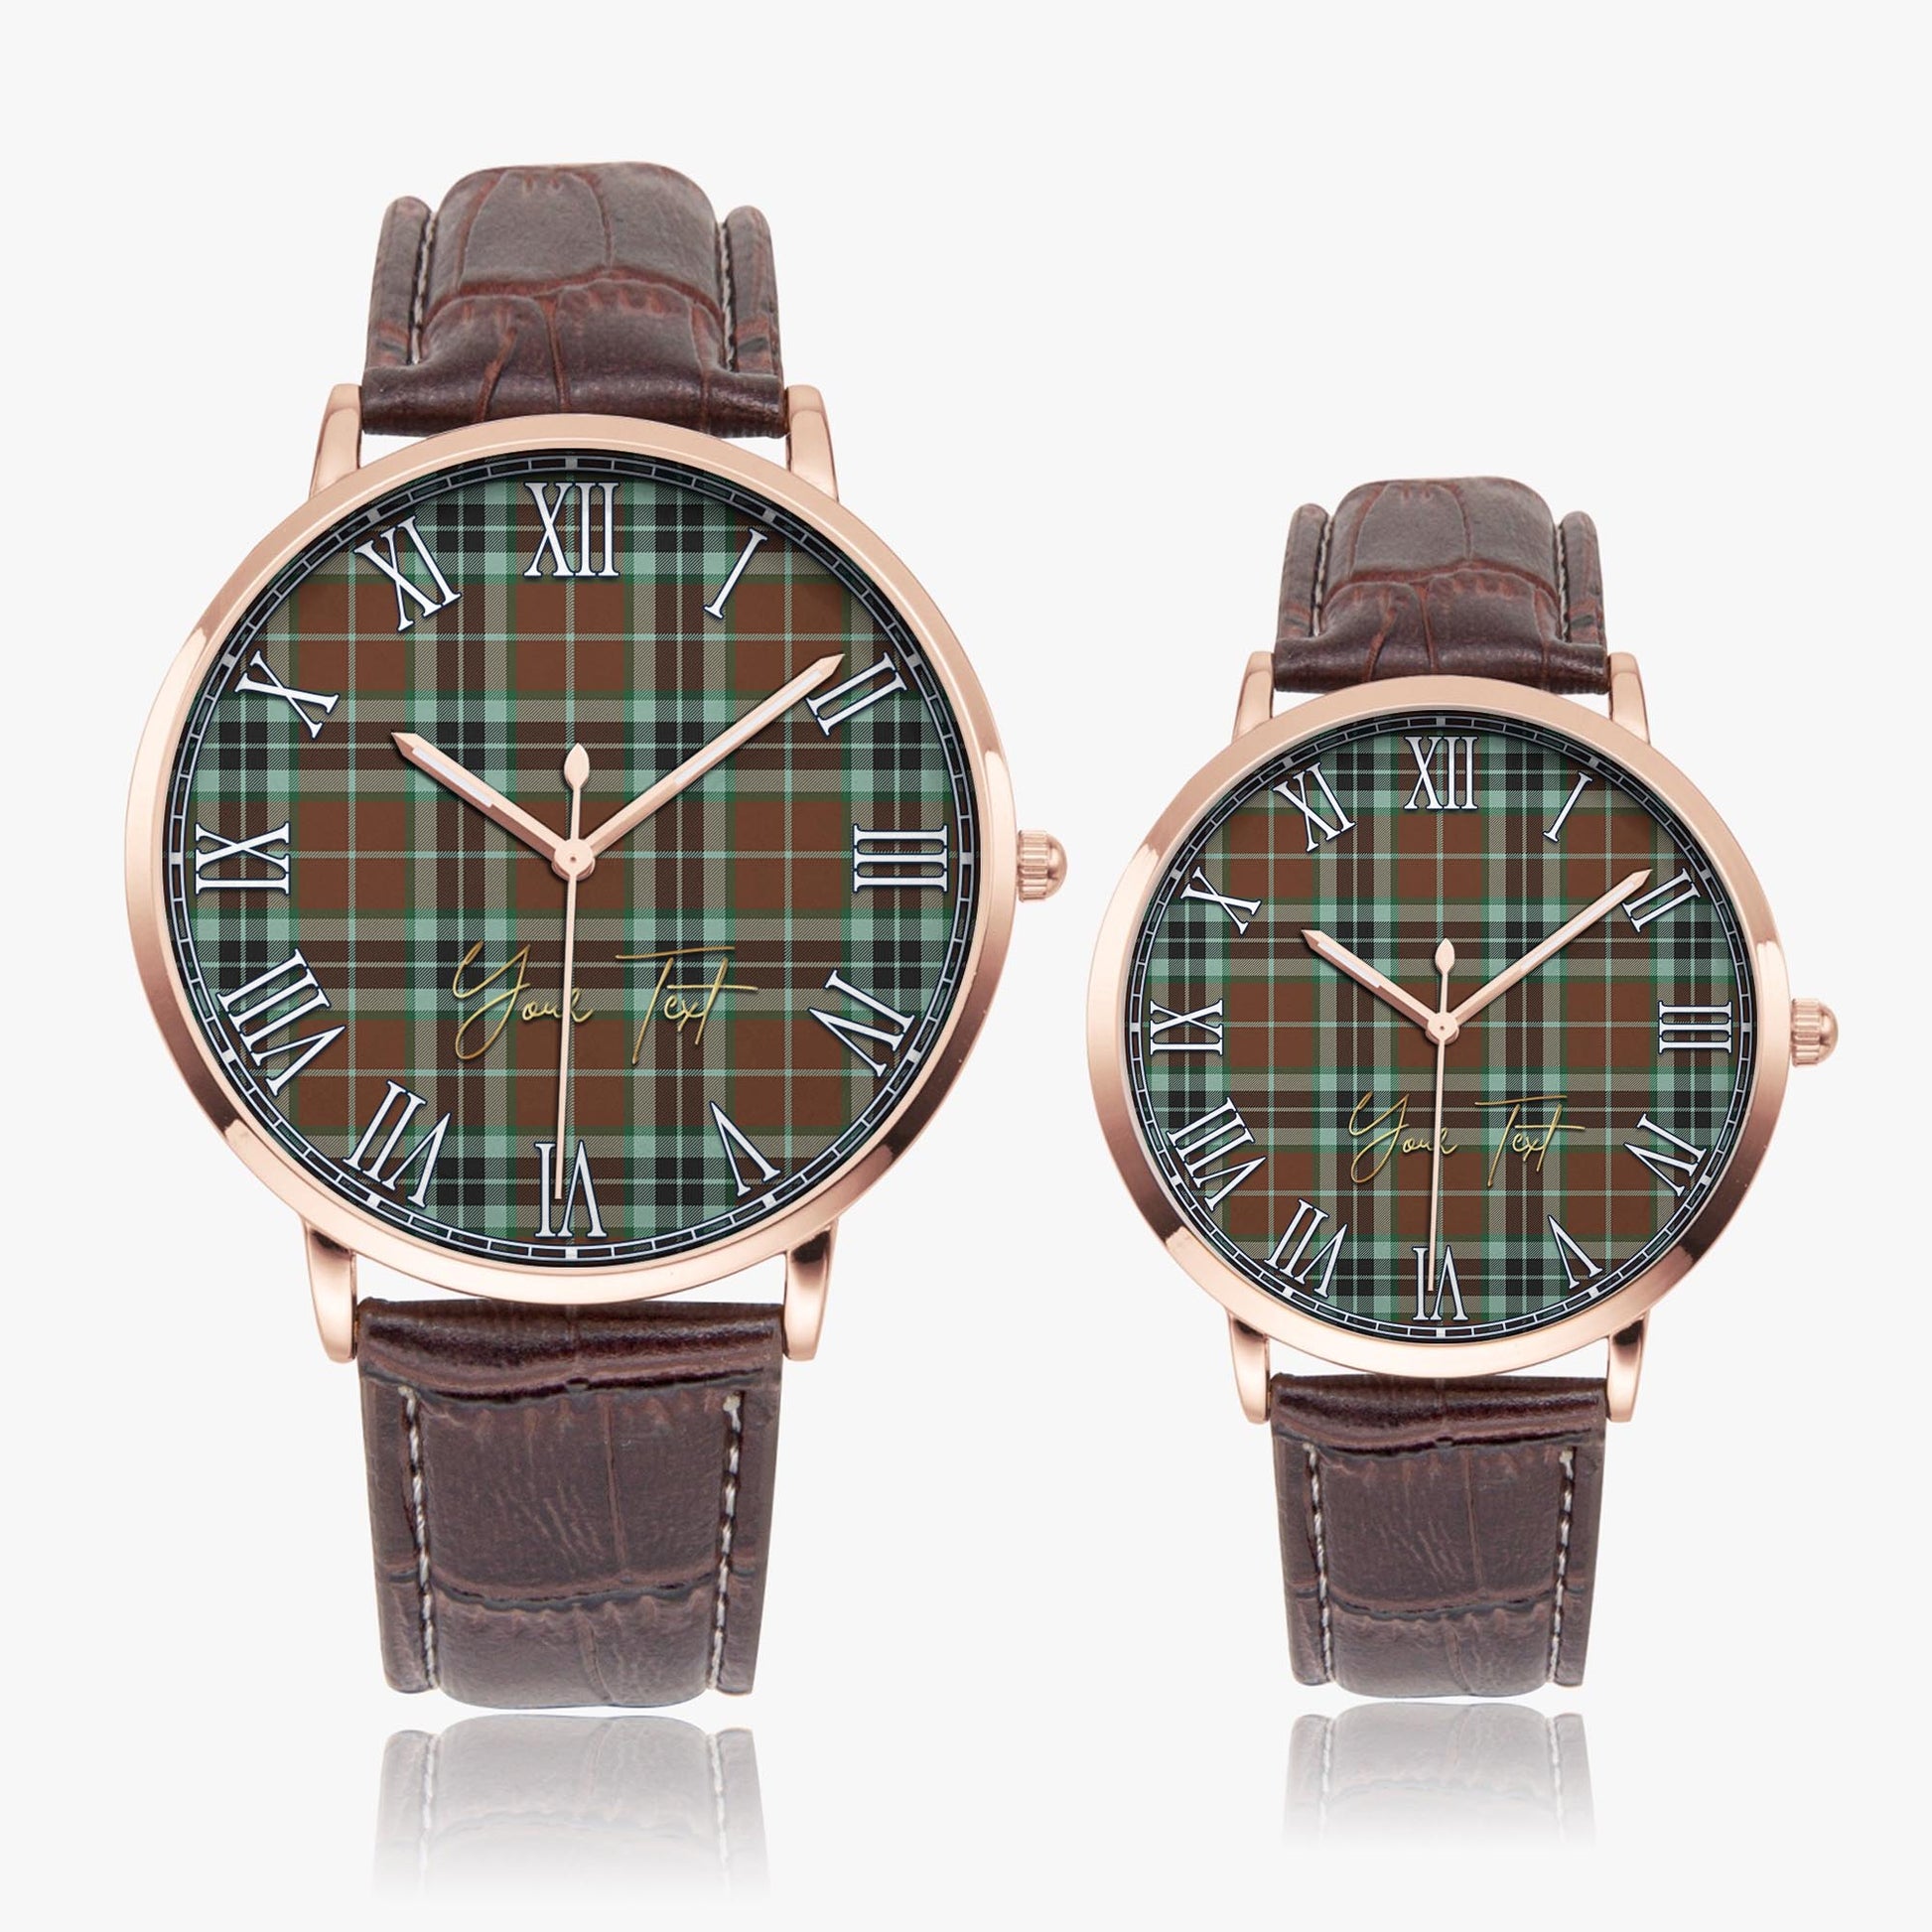 Thomson Hunting Modern Tartan Personalized Your Text Leather Trap Quartz Watch Ultra Thin Rose Gold Case With Brown Leather Strap - Tartanvibesclothing Shop